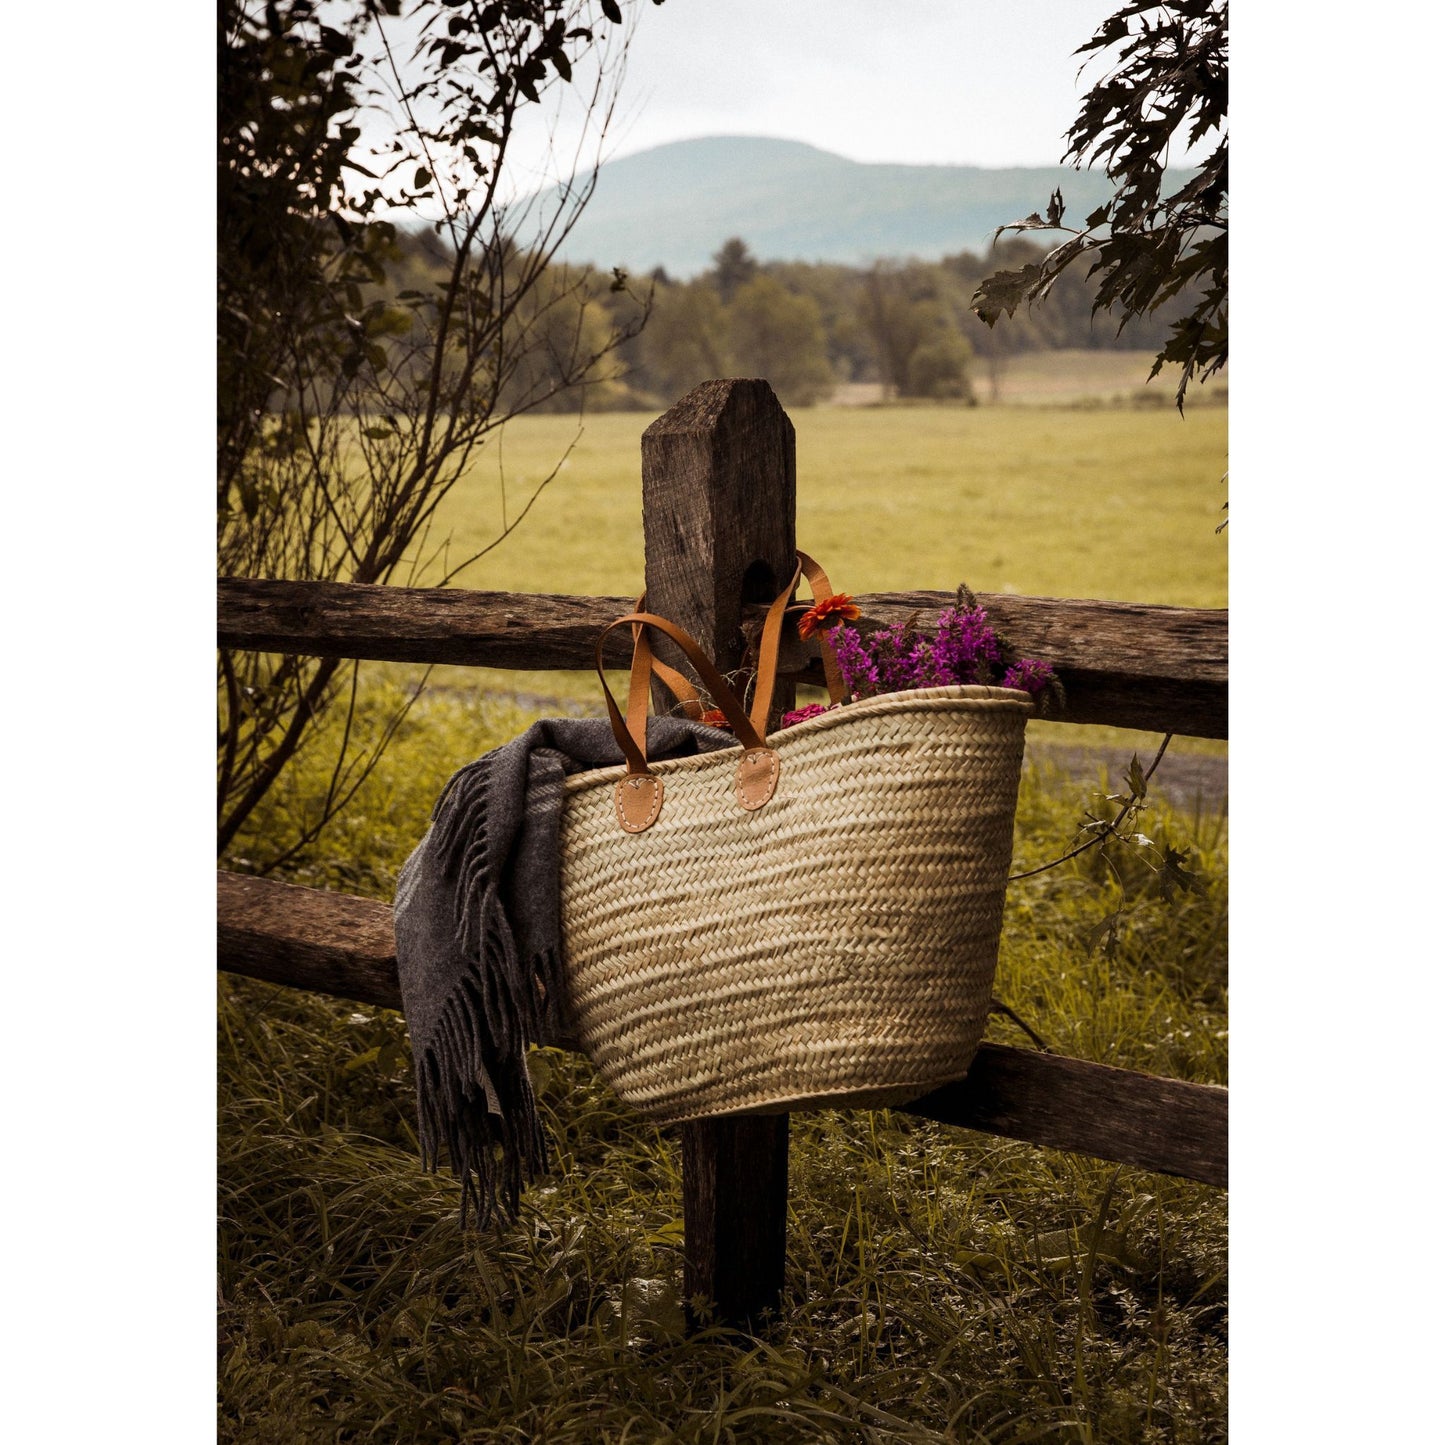 French Market Tote Basket with flowers and a blanket in it hanging on a wooden fence